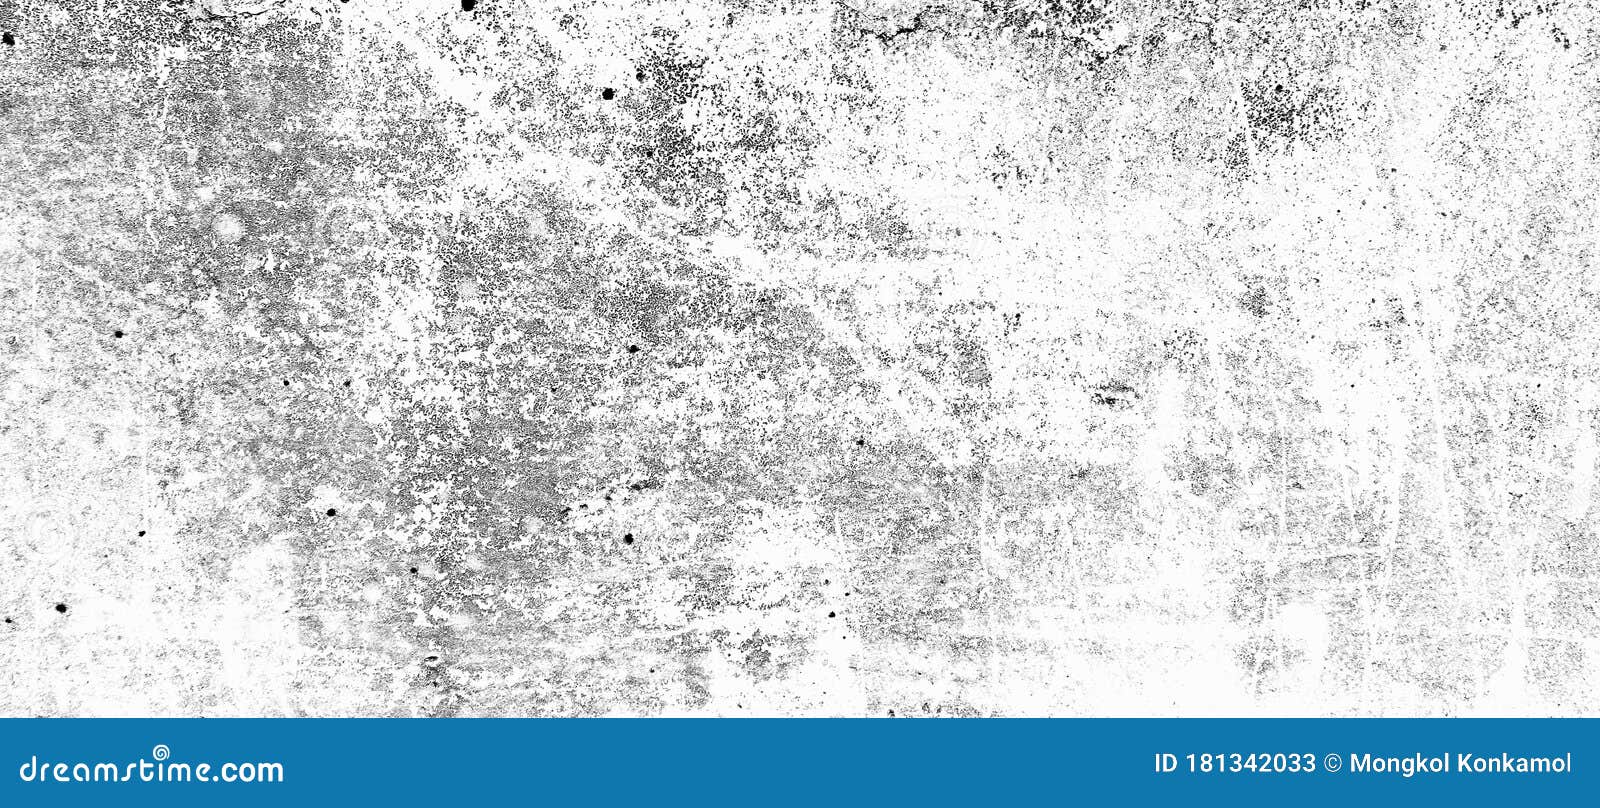 Black and White Grunge Texture Background, Scratched, Vintage Backdrop,  Distress Overlay Texture for Design Stock Image - Image of paint, aged:  181342033